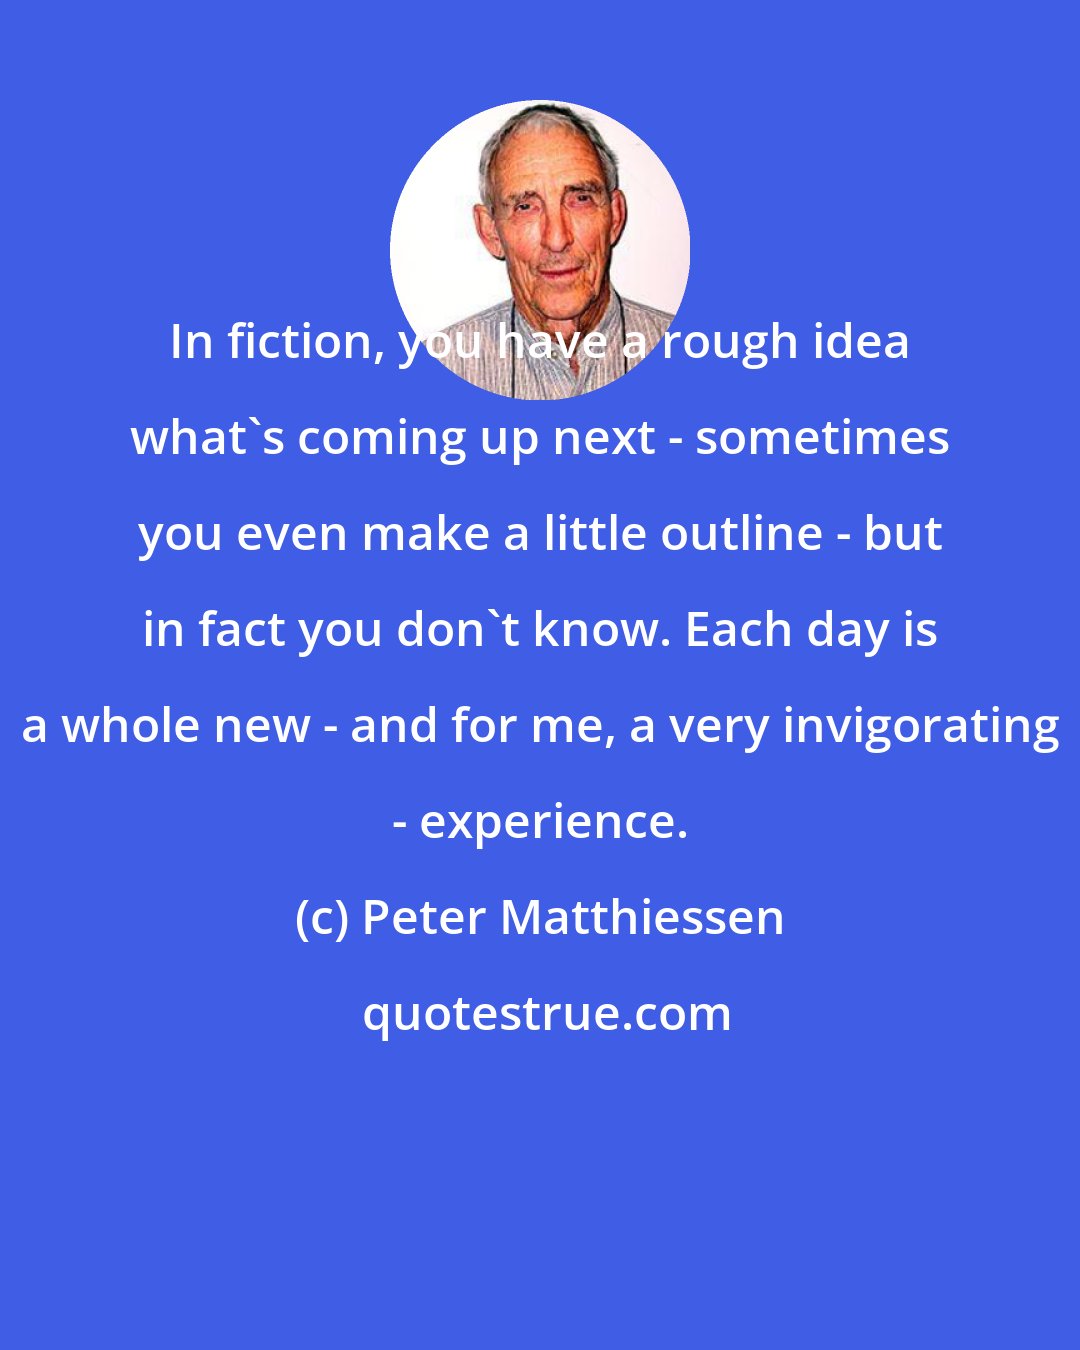 Peter Matthiessen: In fiction, you have a rough idea what's coming up next - sometimes you even make a little outline - but in fact you don't know. Each day is a whole new - and for me, a very invigorating - experience.